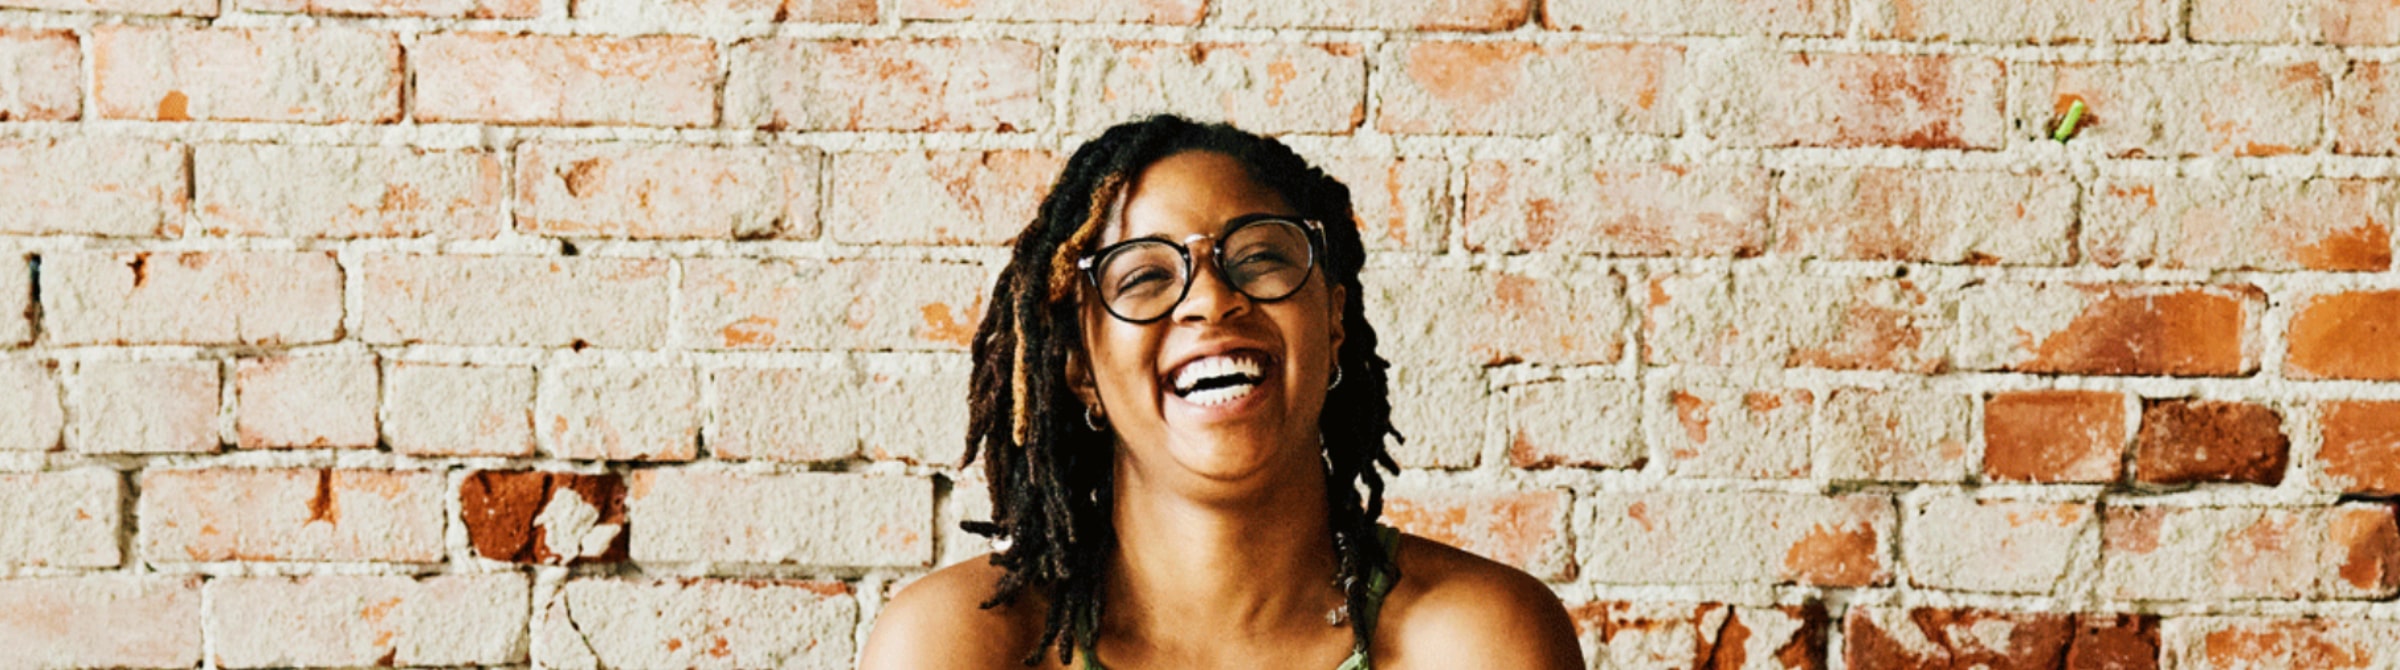 yoga teacher wears round glasses with a big smile